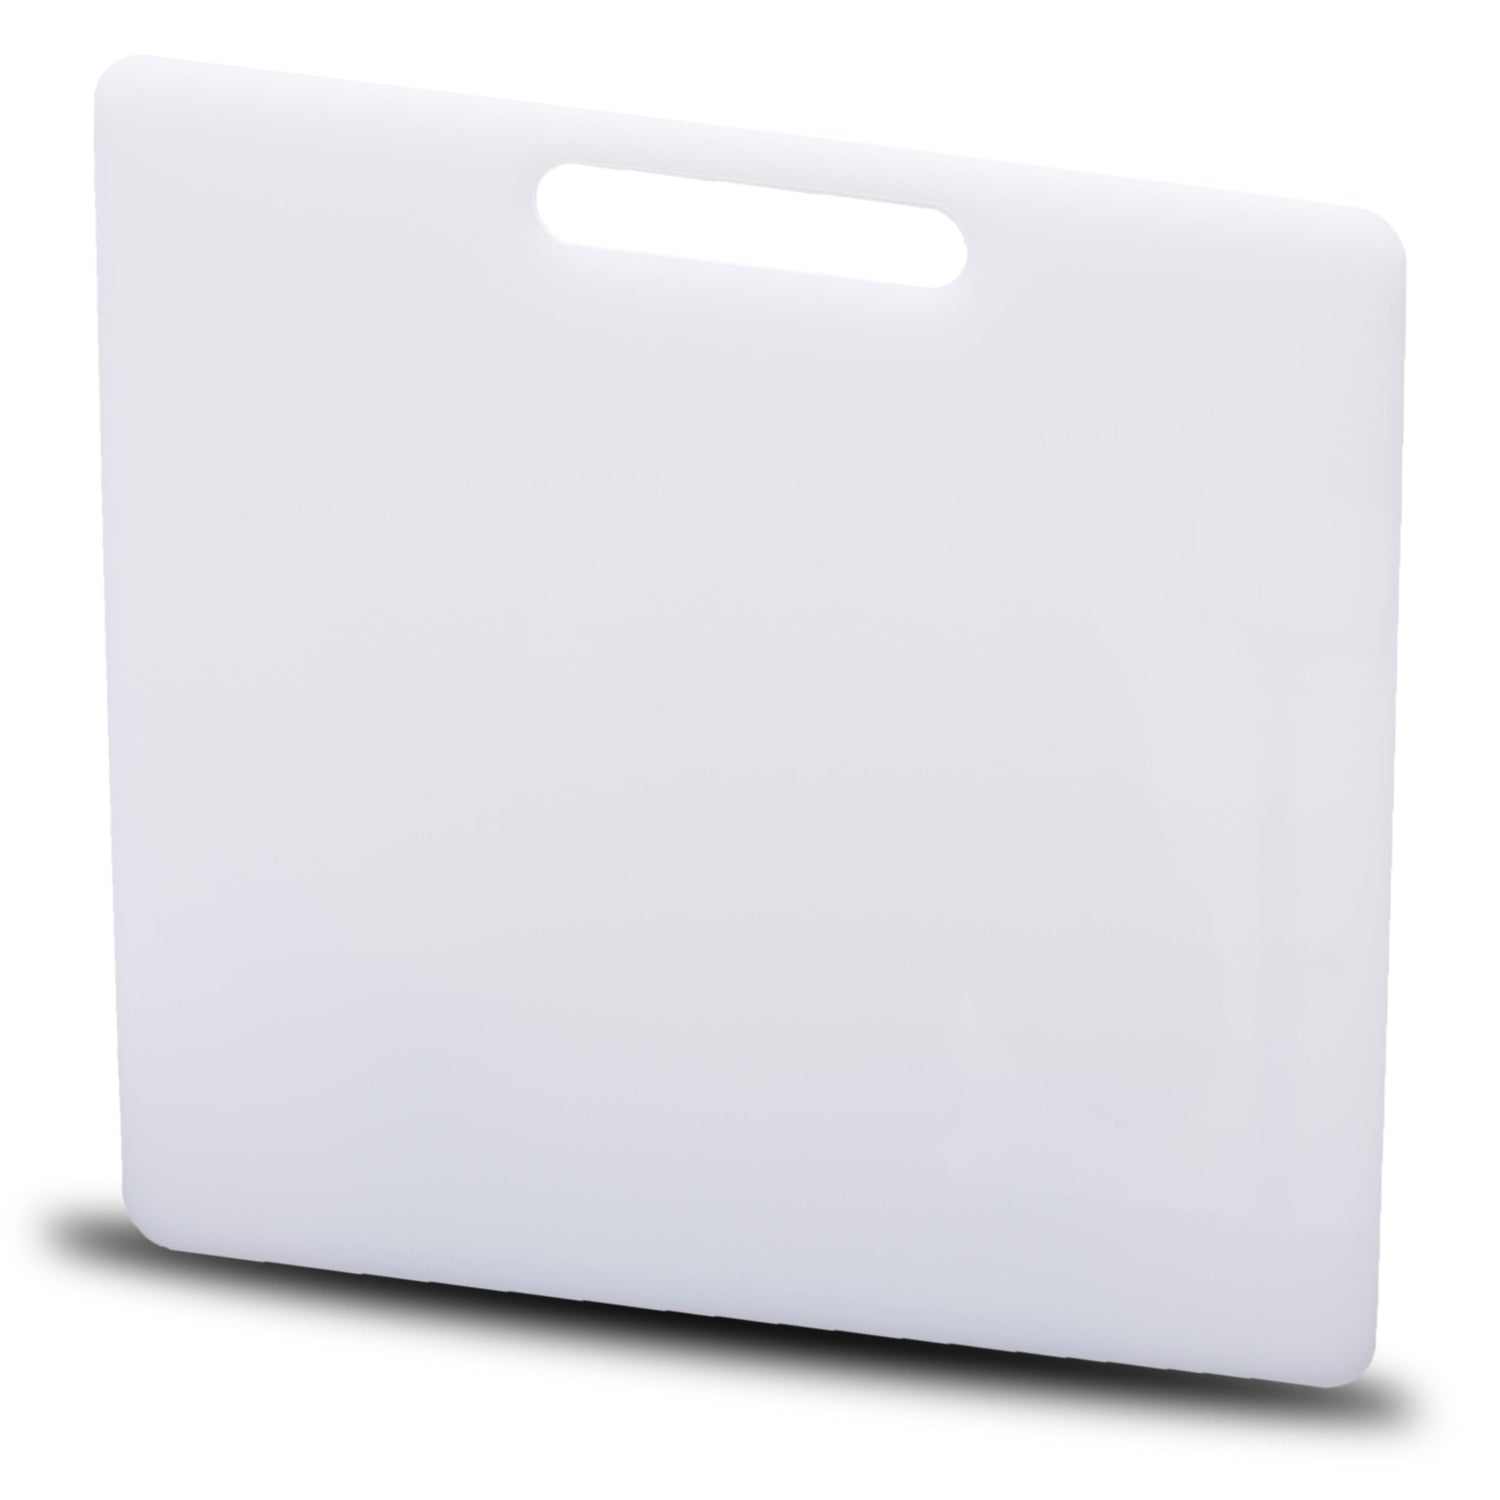 Accessory - Interior Divider / Cutting Board for 25 Quart Cobalt Coolers